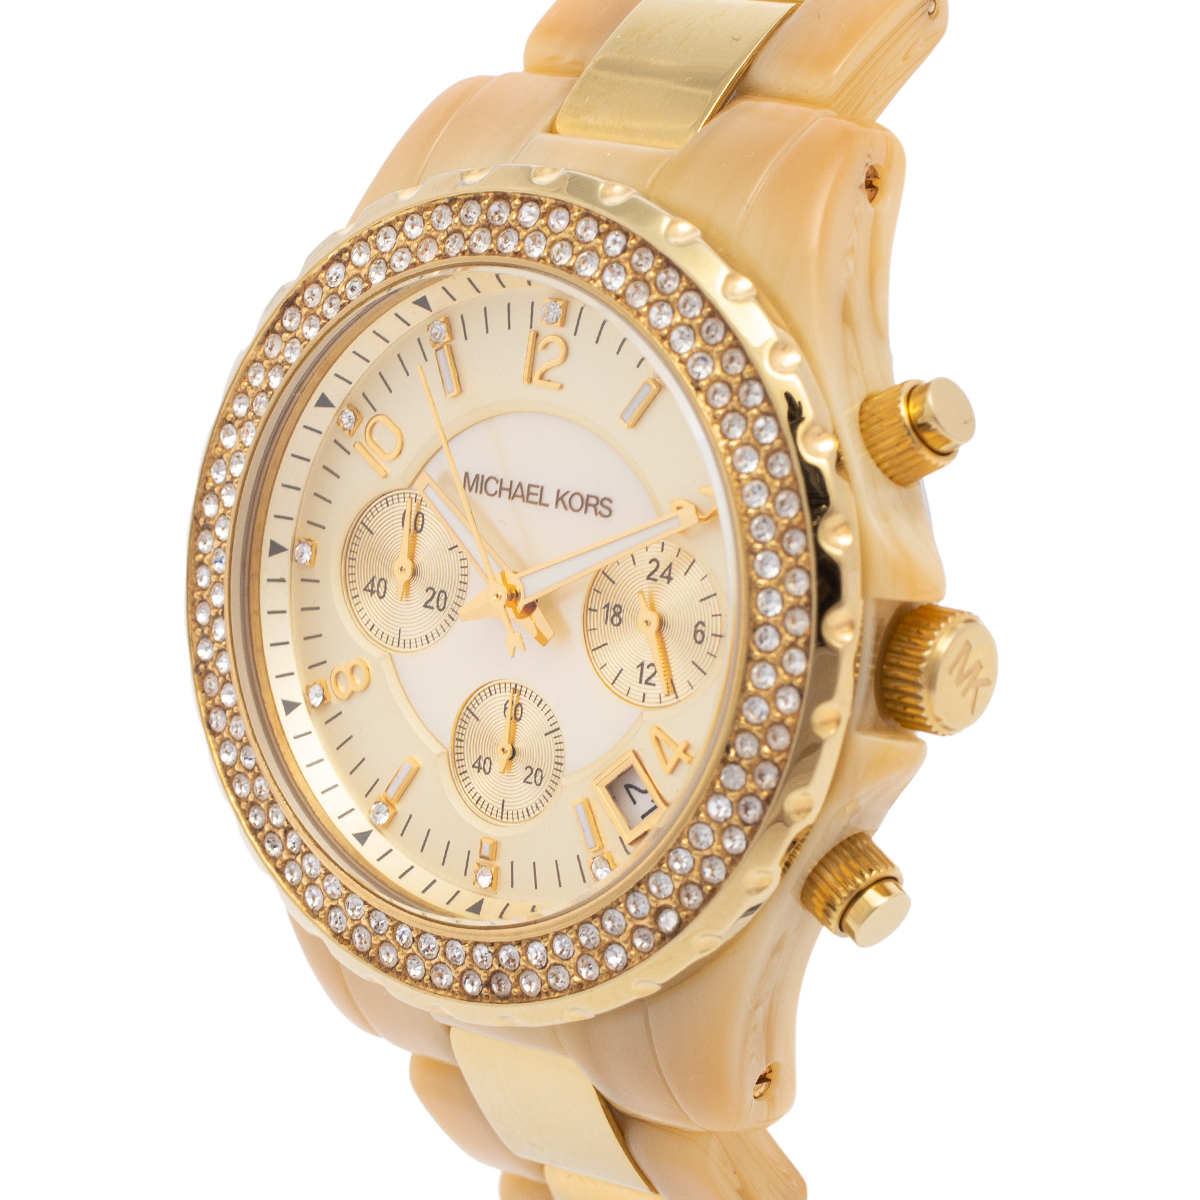 

Michael Kors Mother of Pearl Gold Tone Stainless Steel & Horn Acetate Madison MK5417 Women's Wristwatch